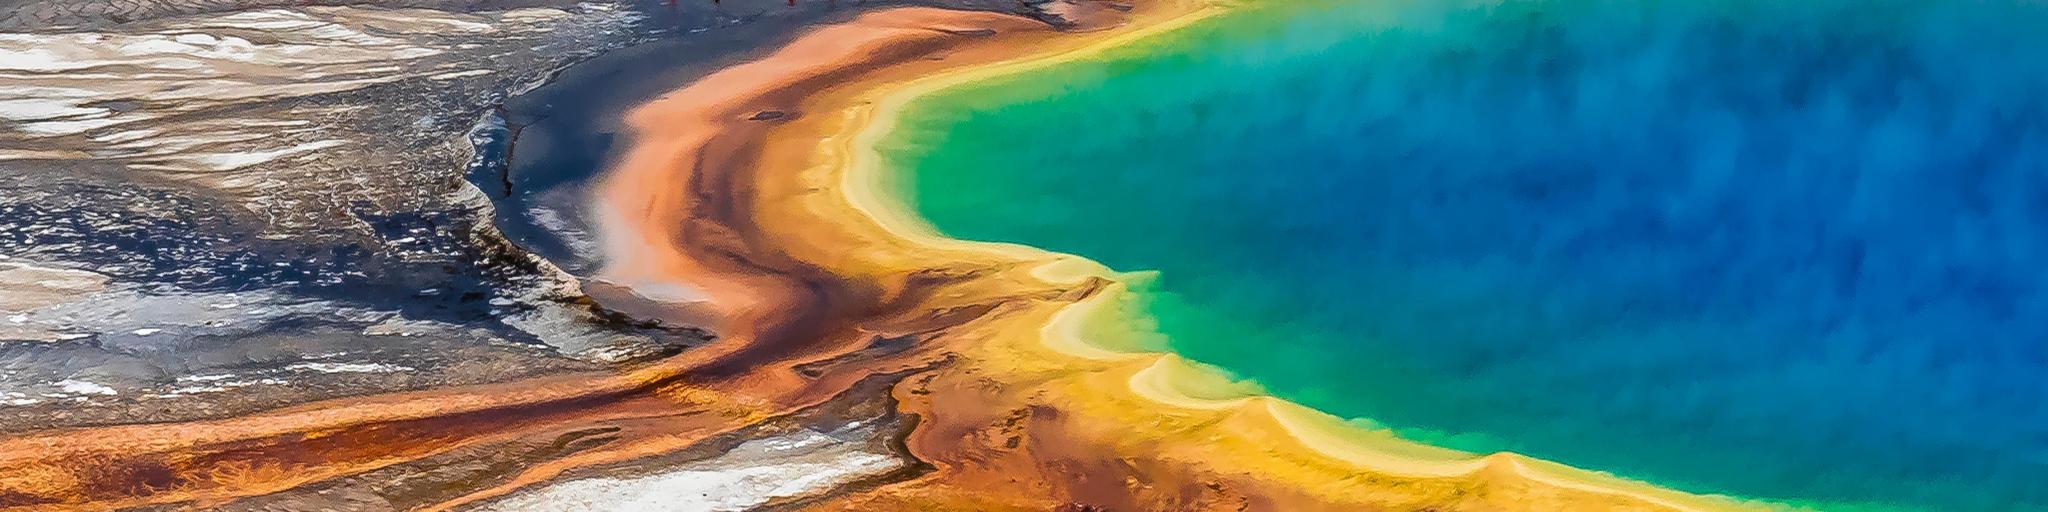 Grand Prismatic Spring in Yellowstone National Park, Wyoming, USA taken as a view from above.